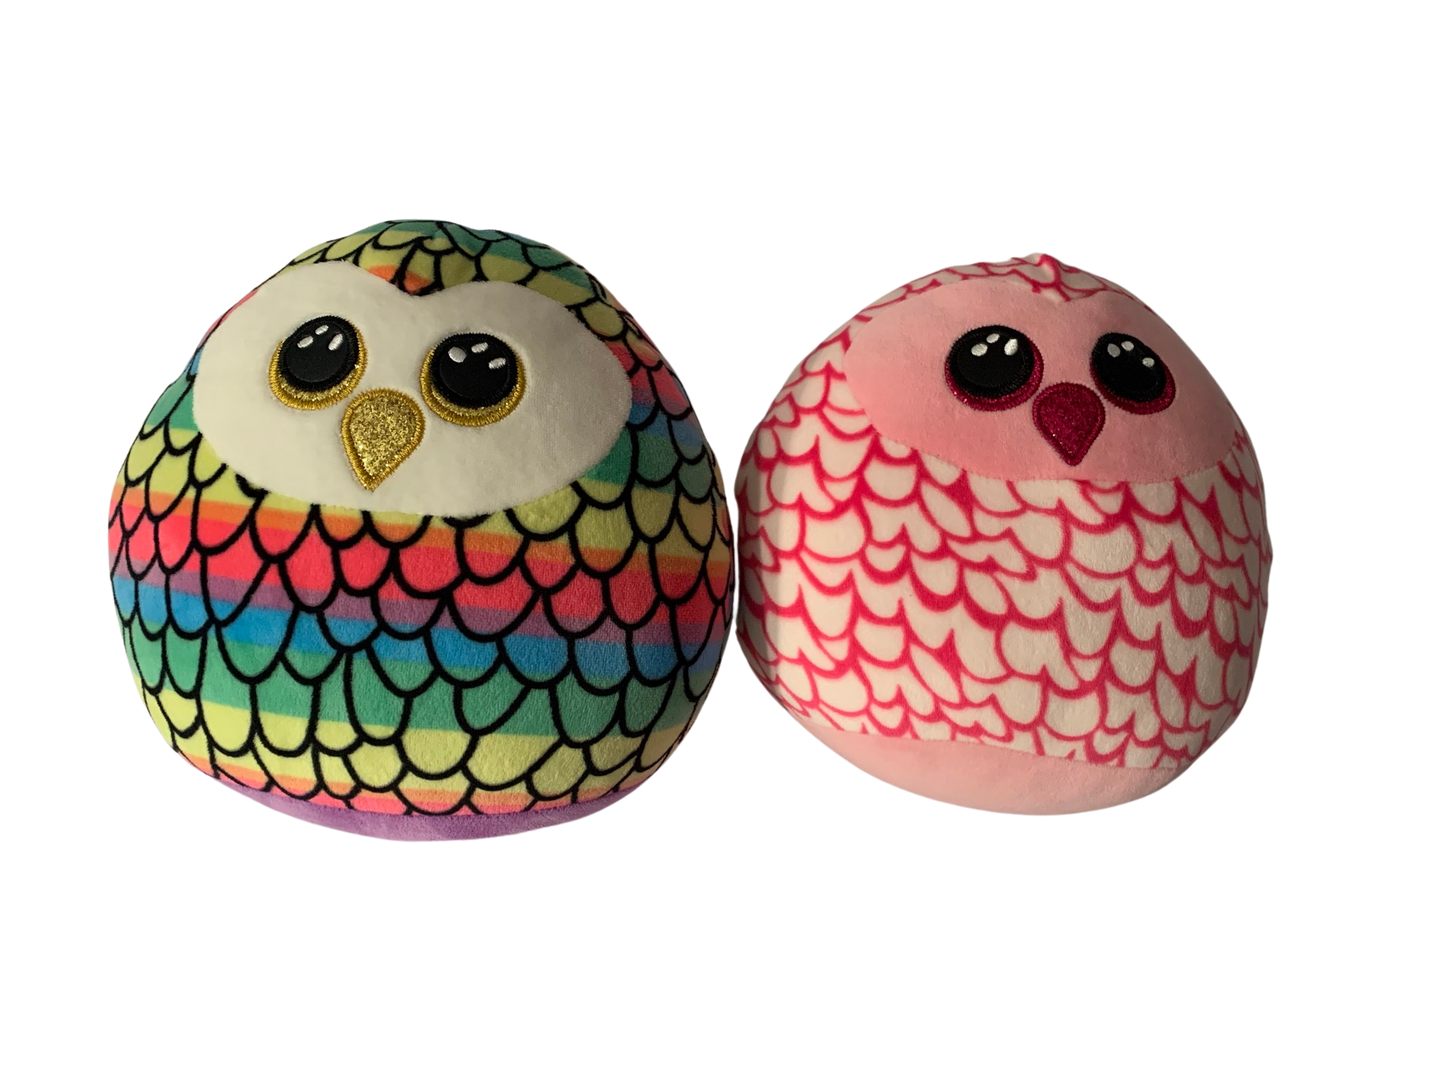 Weighted stuffed animals, round owl, reindeer, unicorn or cat plushies with 4 lbs, colorful owl plush buddy, washable, birds, Aunt Sandy's Sewing